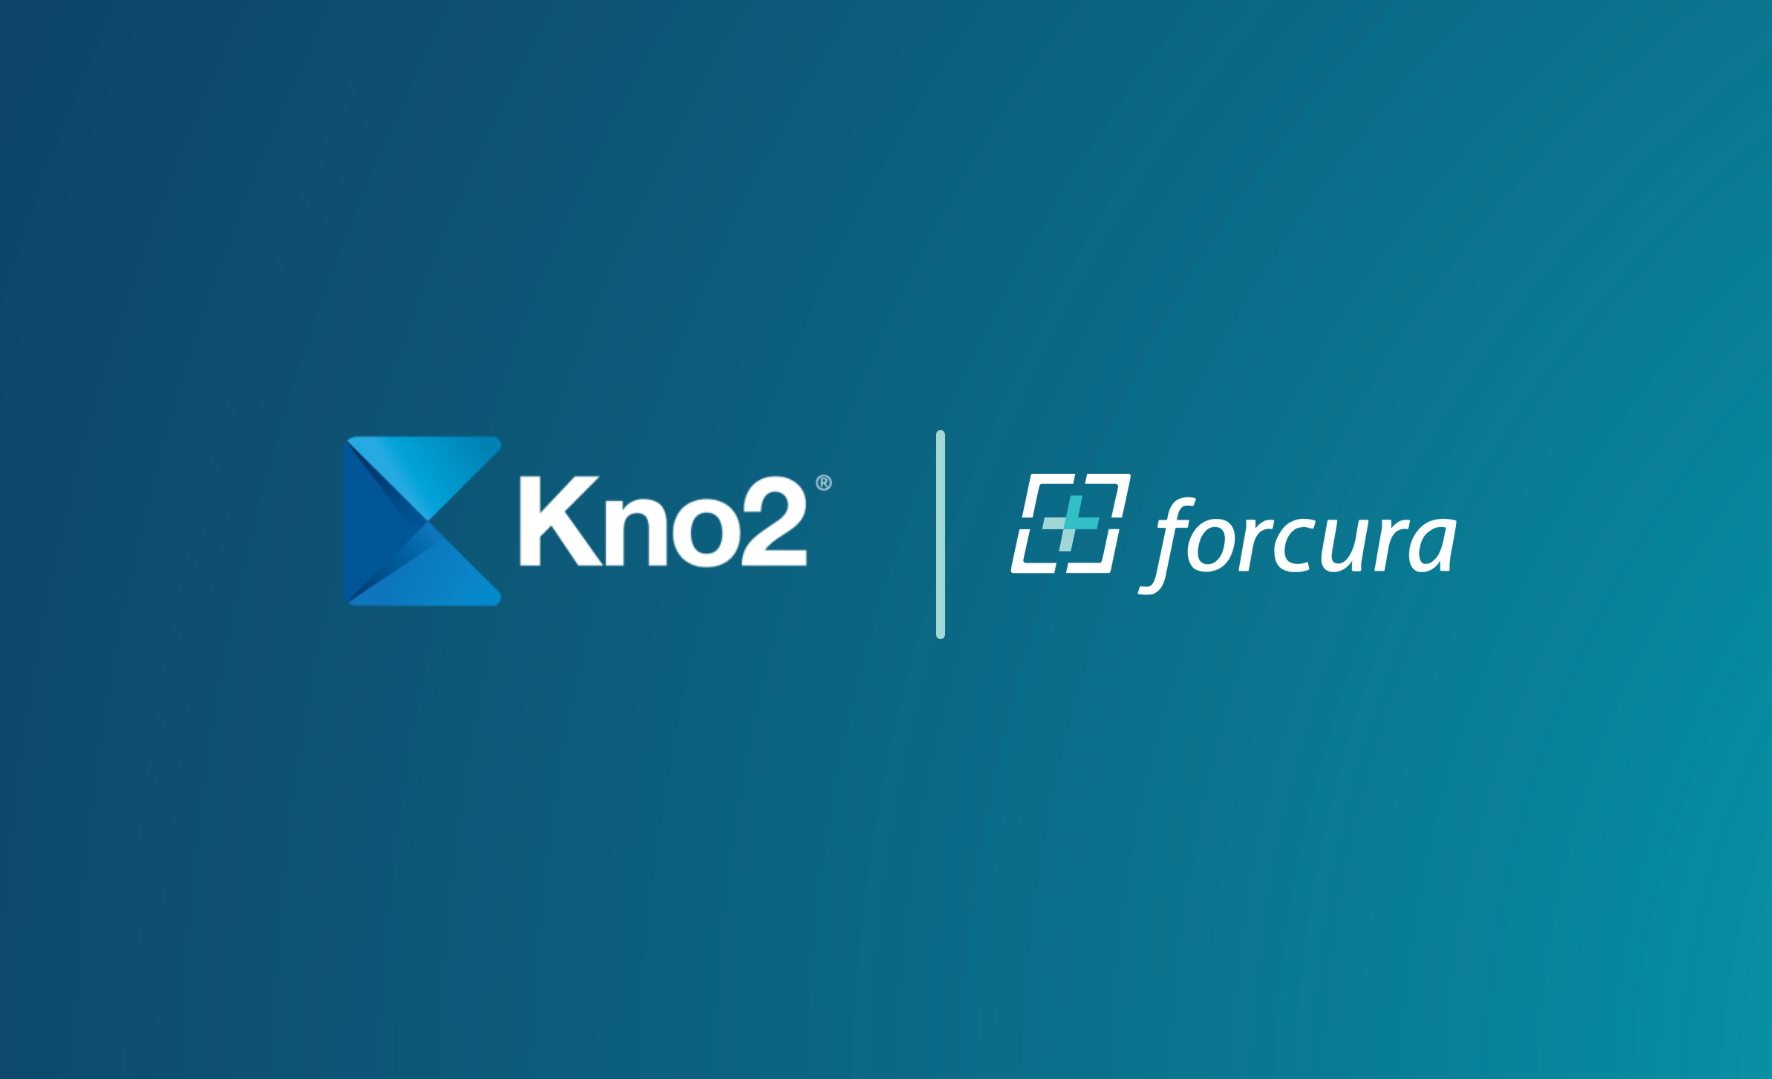 Forcura Announces Kno2 as a Strategic Connectivity Partner